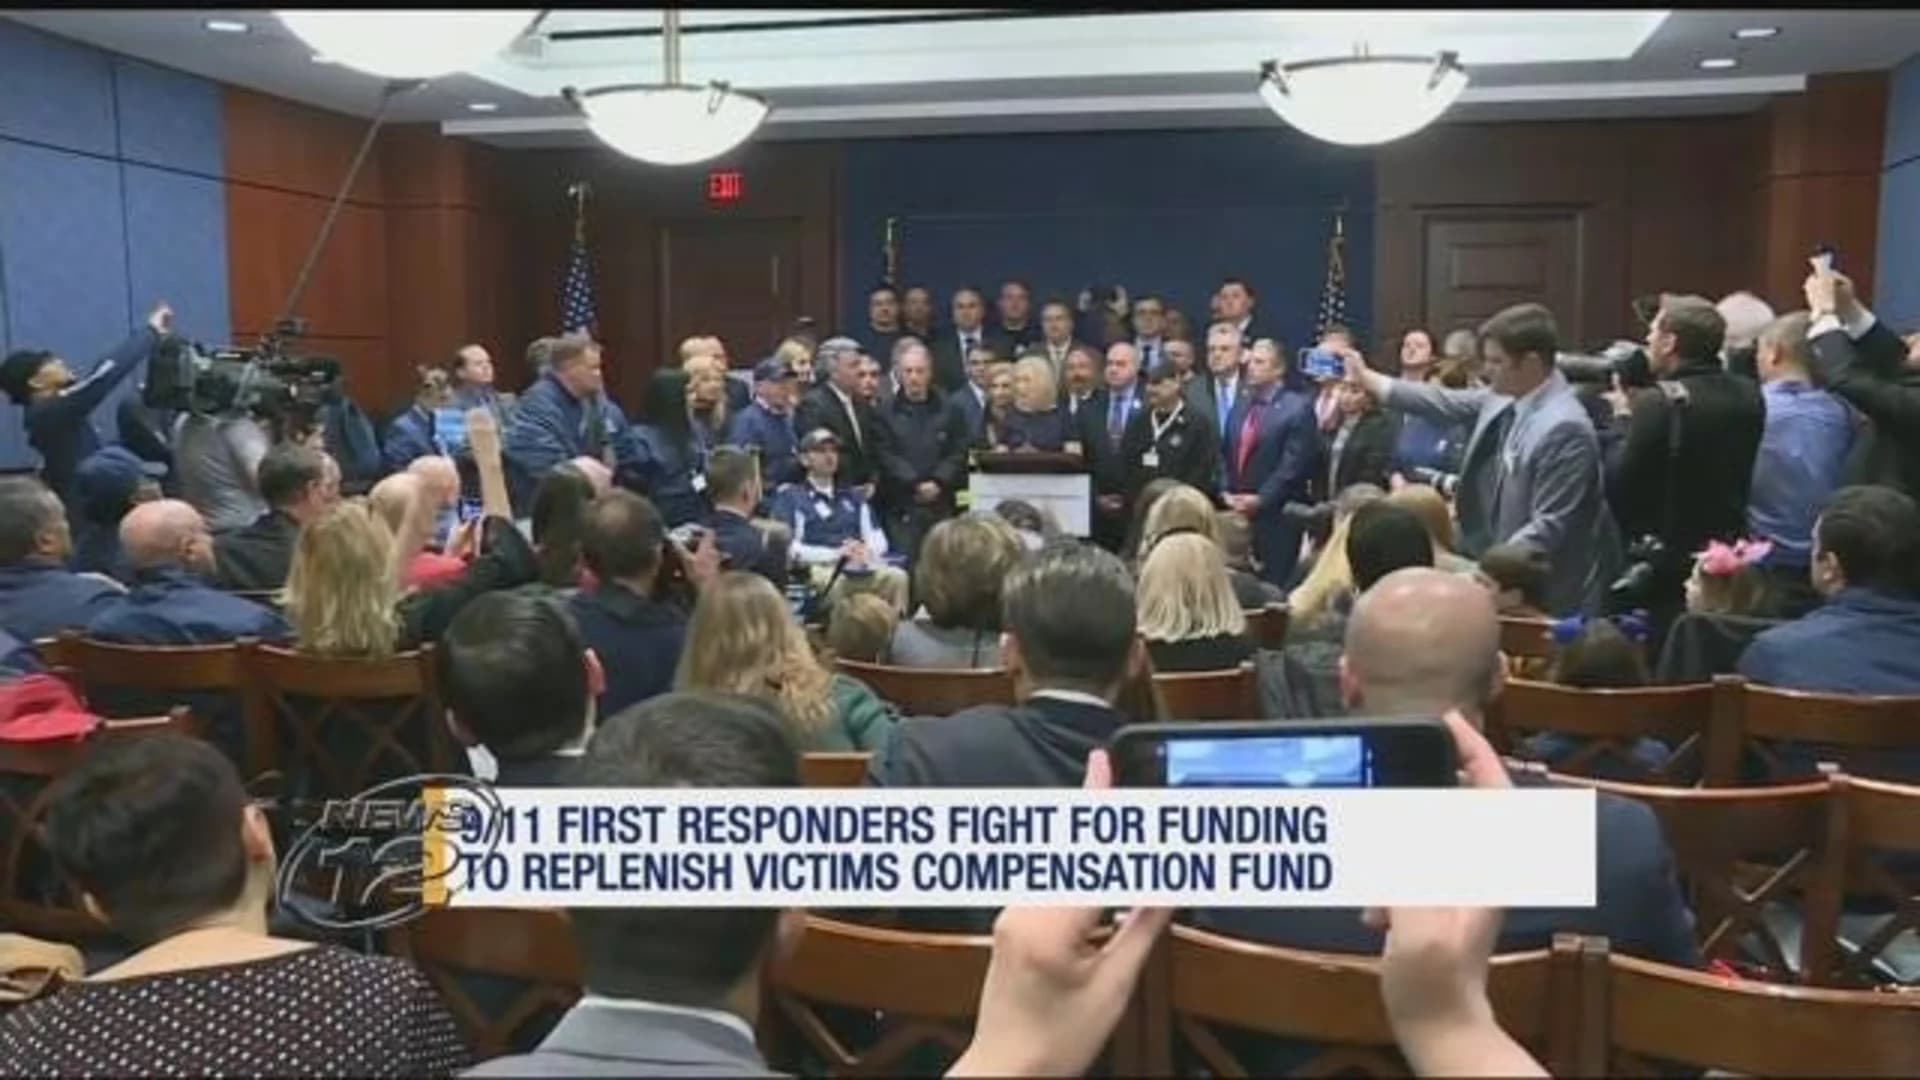 9/11 first responders lobby to replenish Victims Compensations Fund